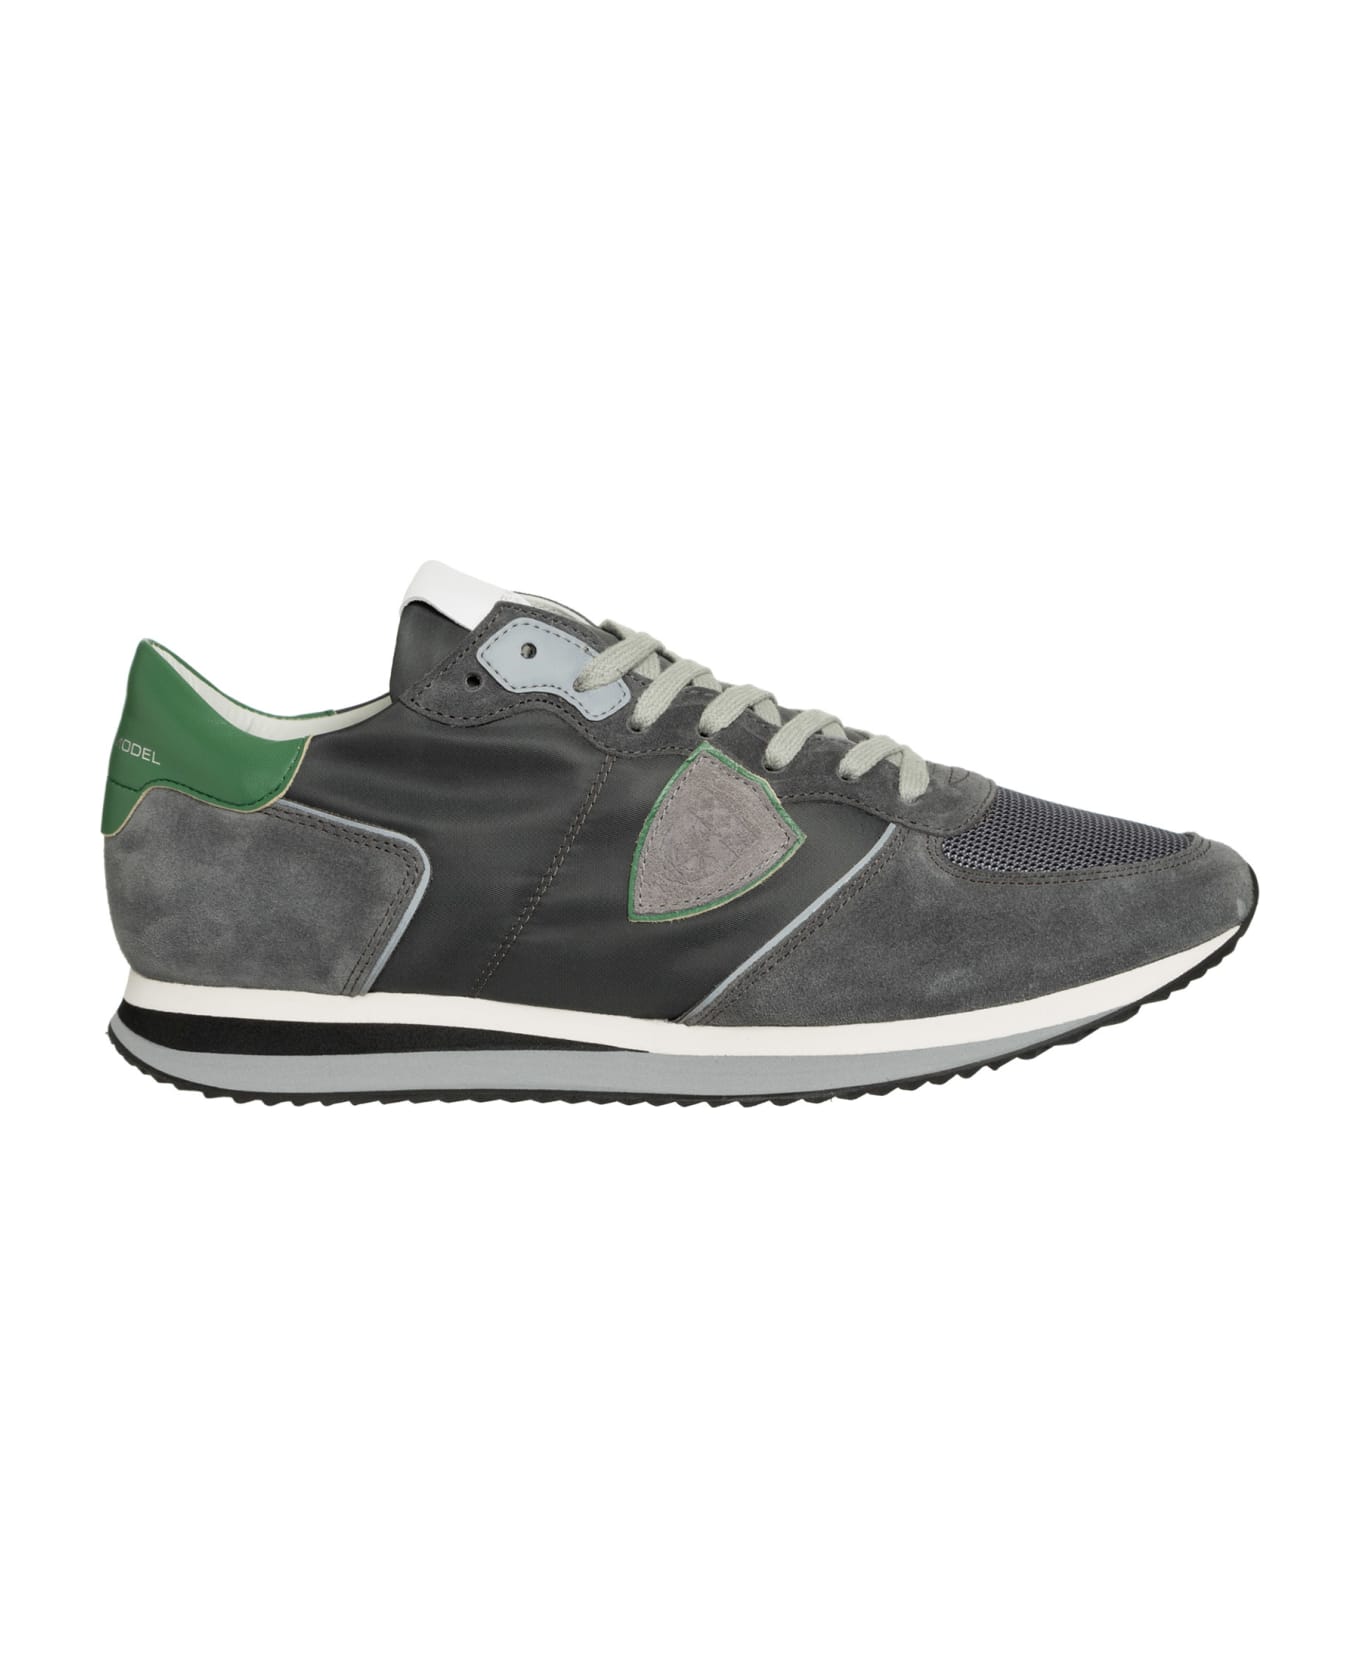 Philippe Model Trpx Leather Sneakers